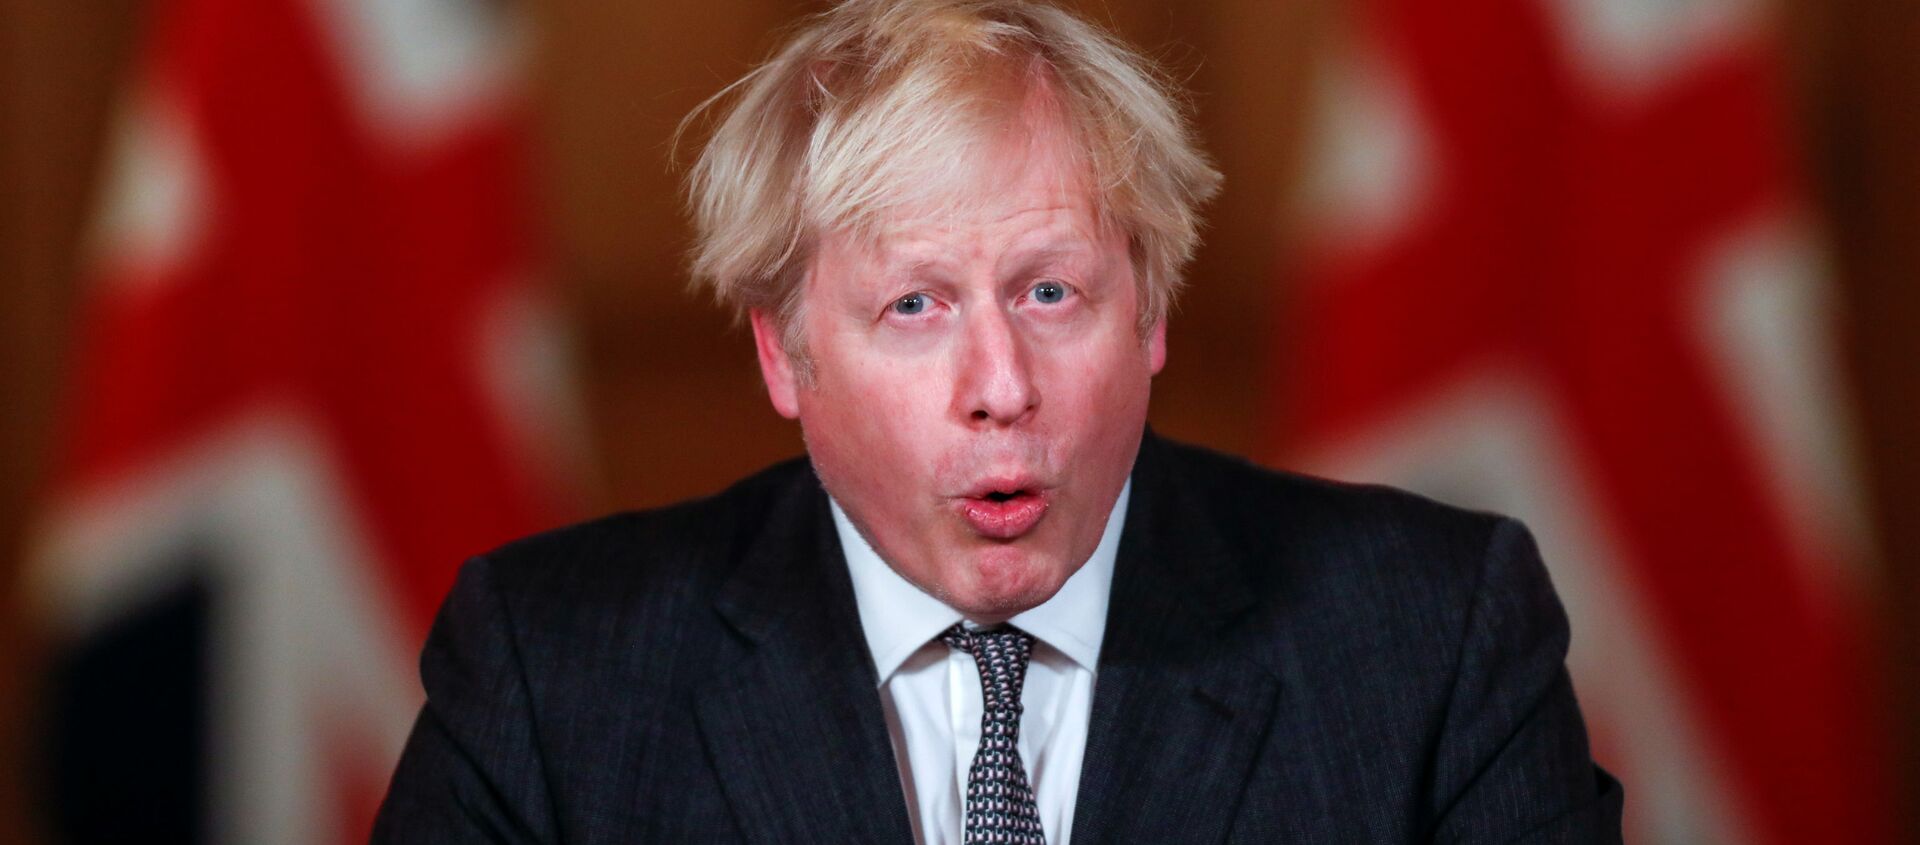 Britain's Prime Minister Boris Johnson speaks during a news conference announcing tightening of COVID-19 tiers, at Downing Street in London, Britain December 30, 2020.  - Sputnik International, 1920, 22.01.2021